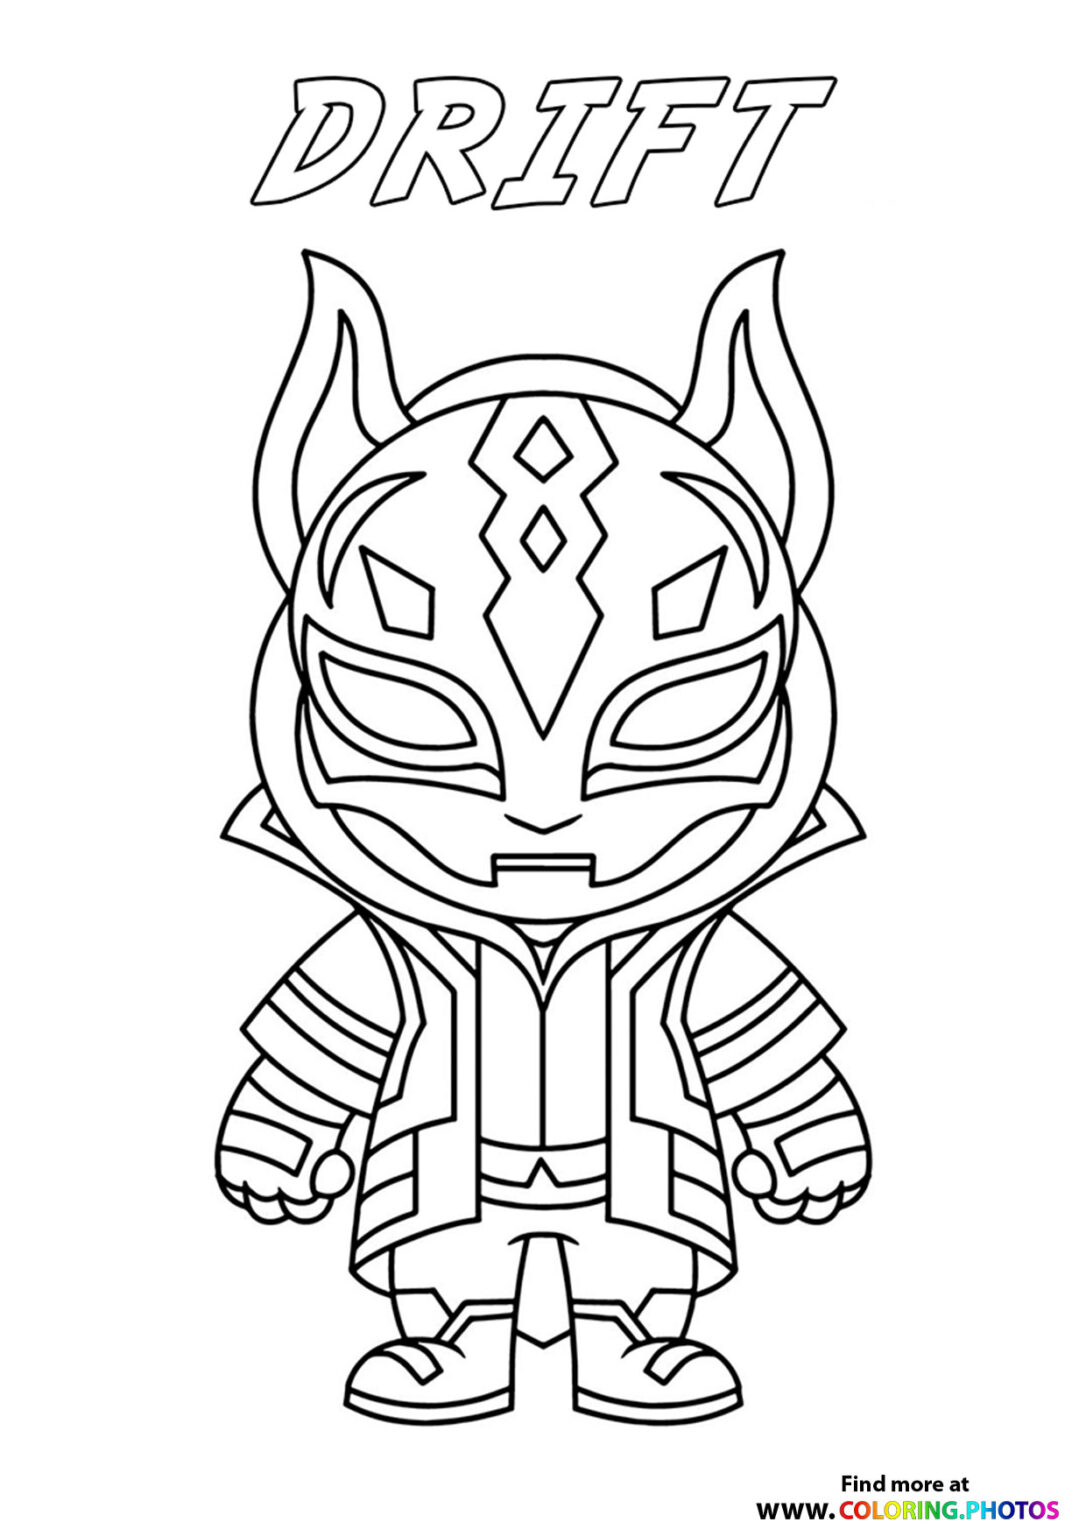 Archetype - Fortnite - Coloring Pages for kids